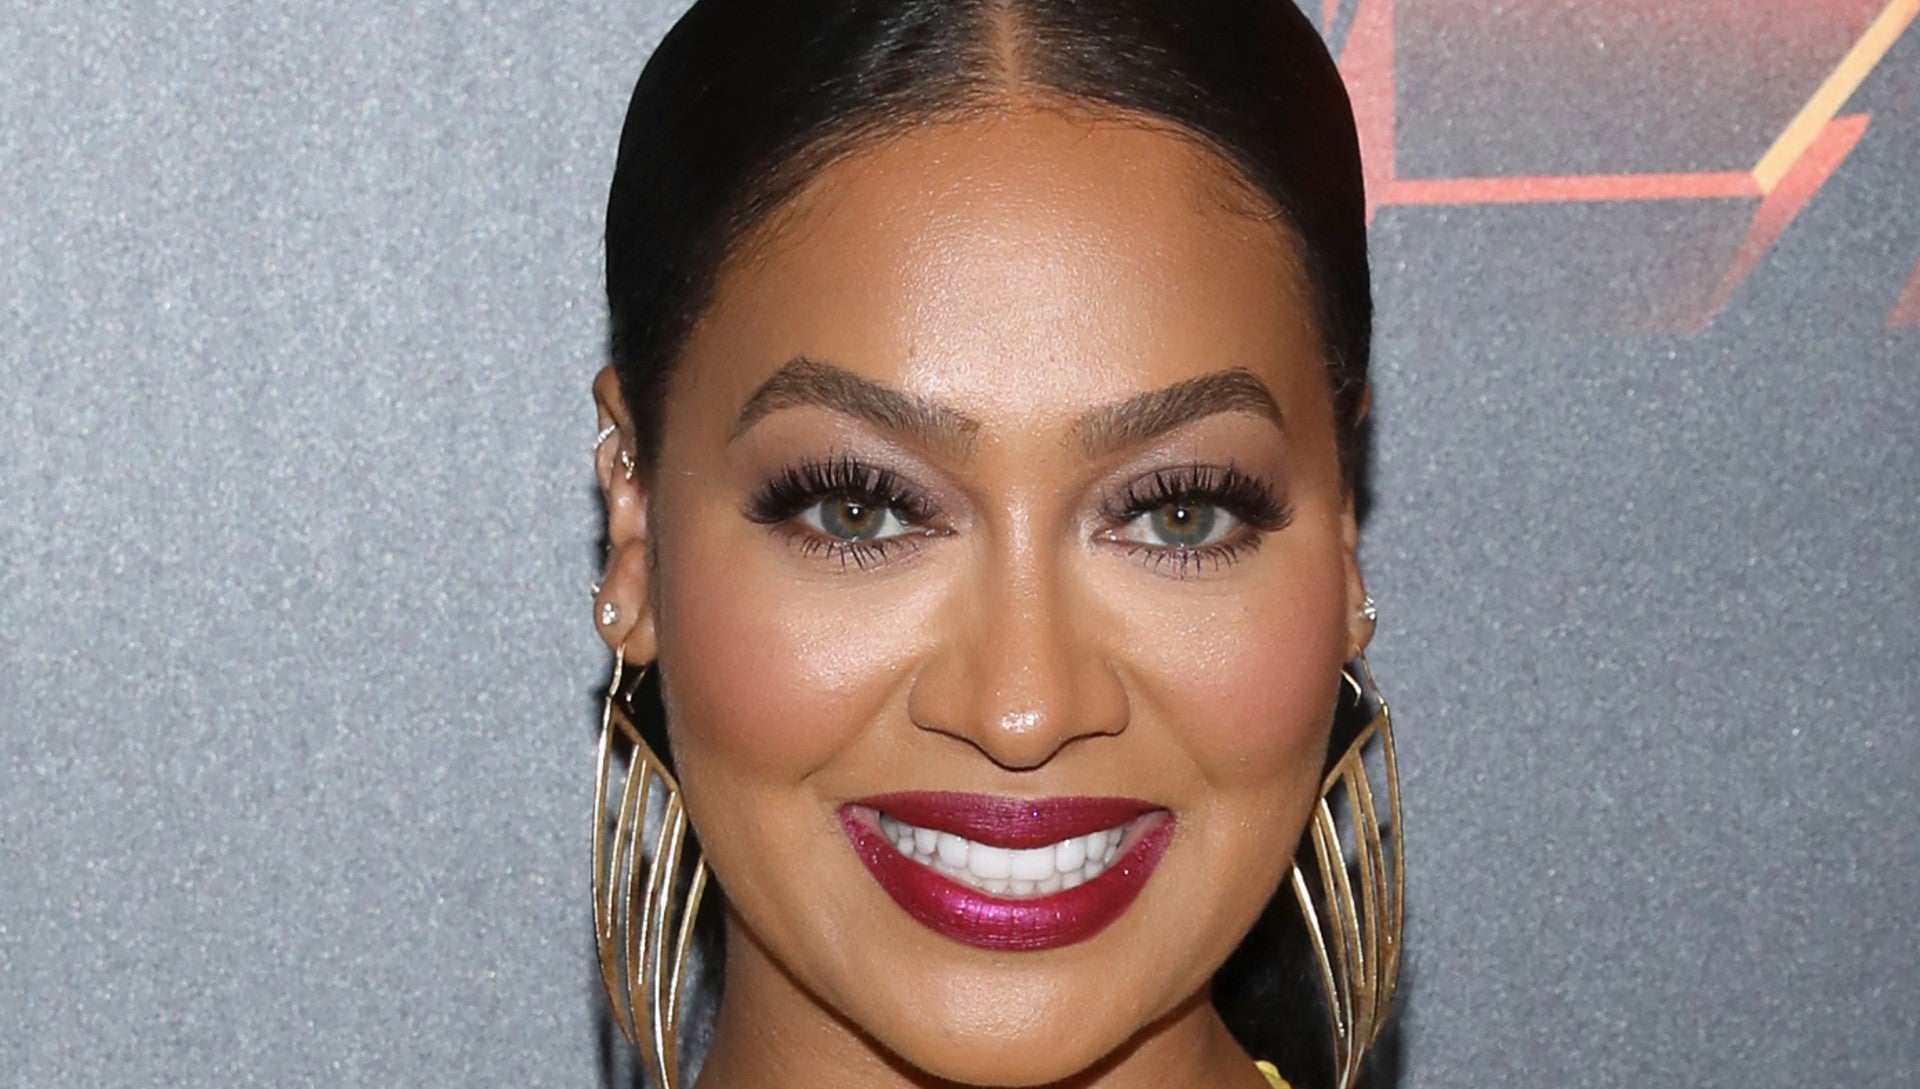 La La Anthony Swears By This $3 Eye Makeup Remover